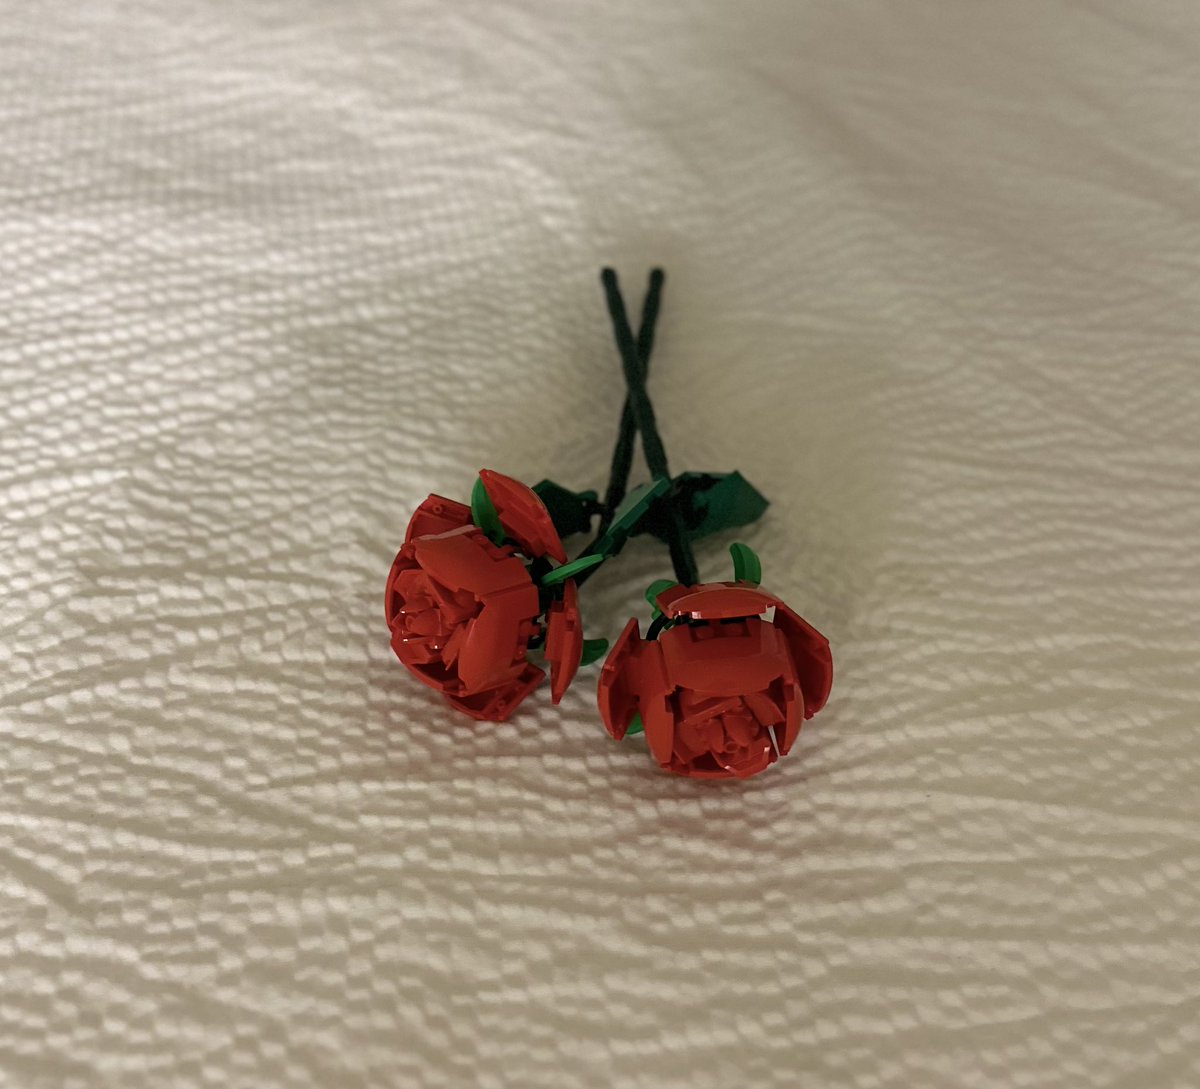 Lego Roses by my lovely Daughter